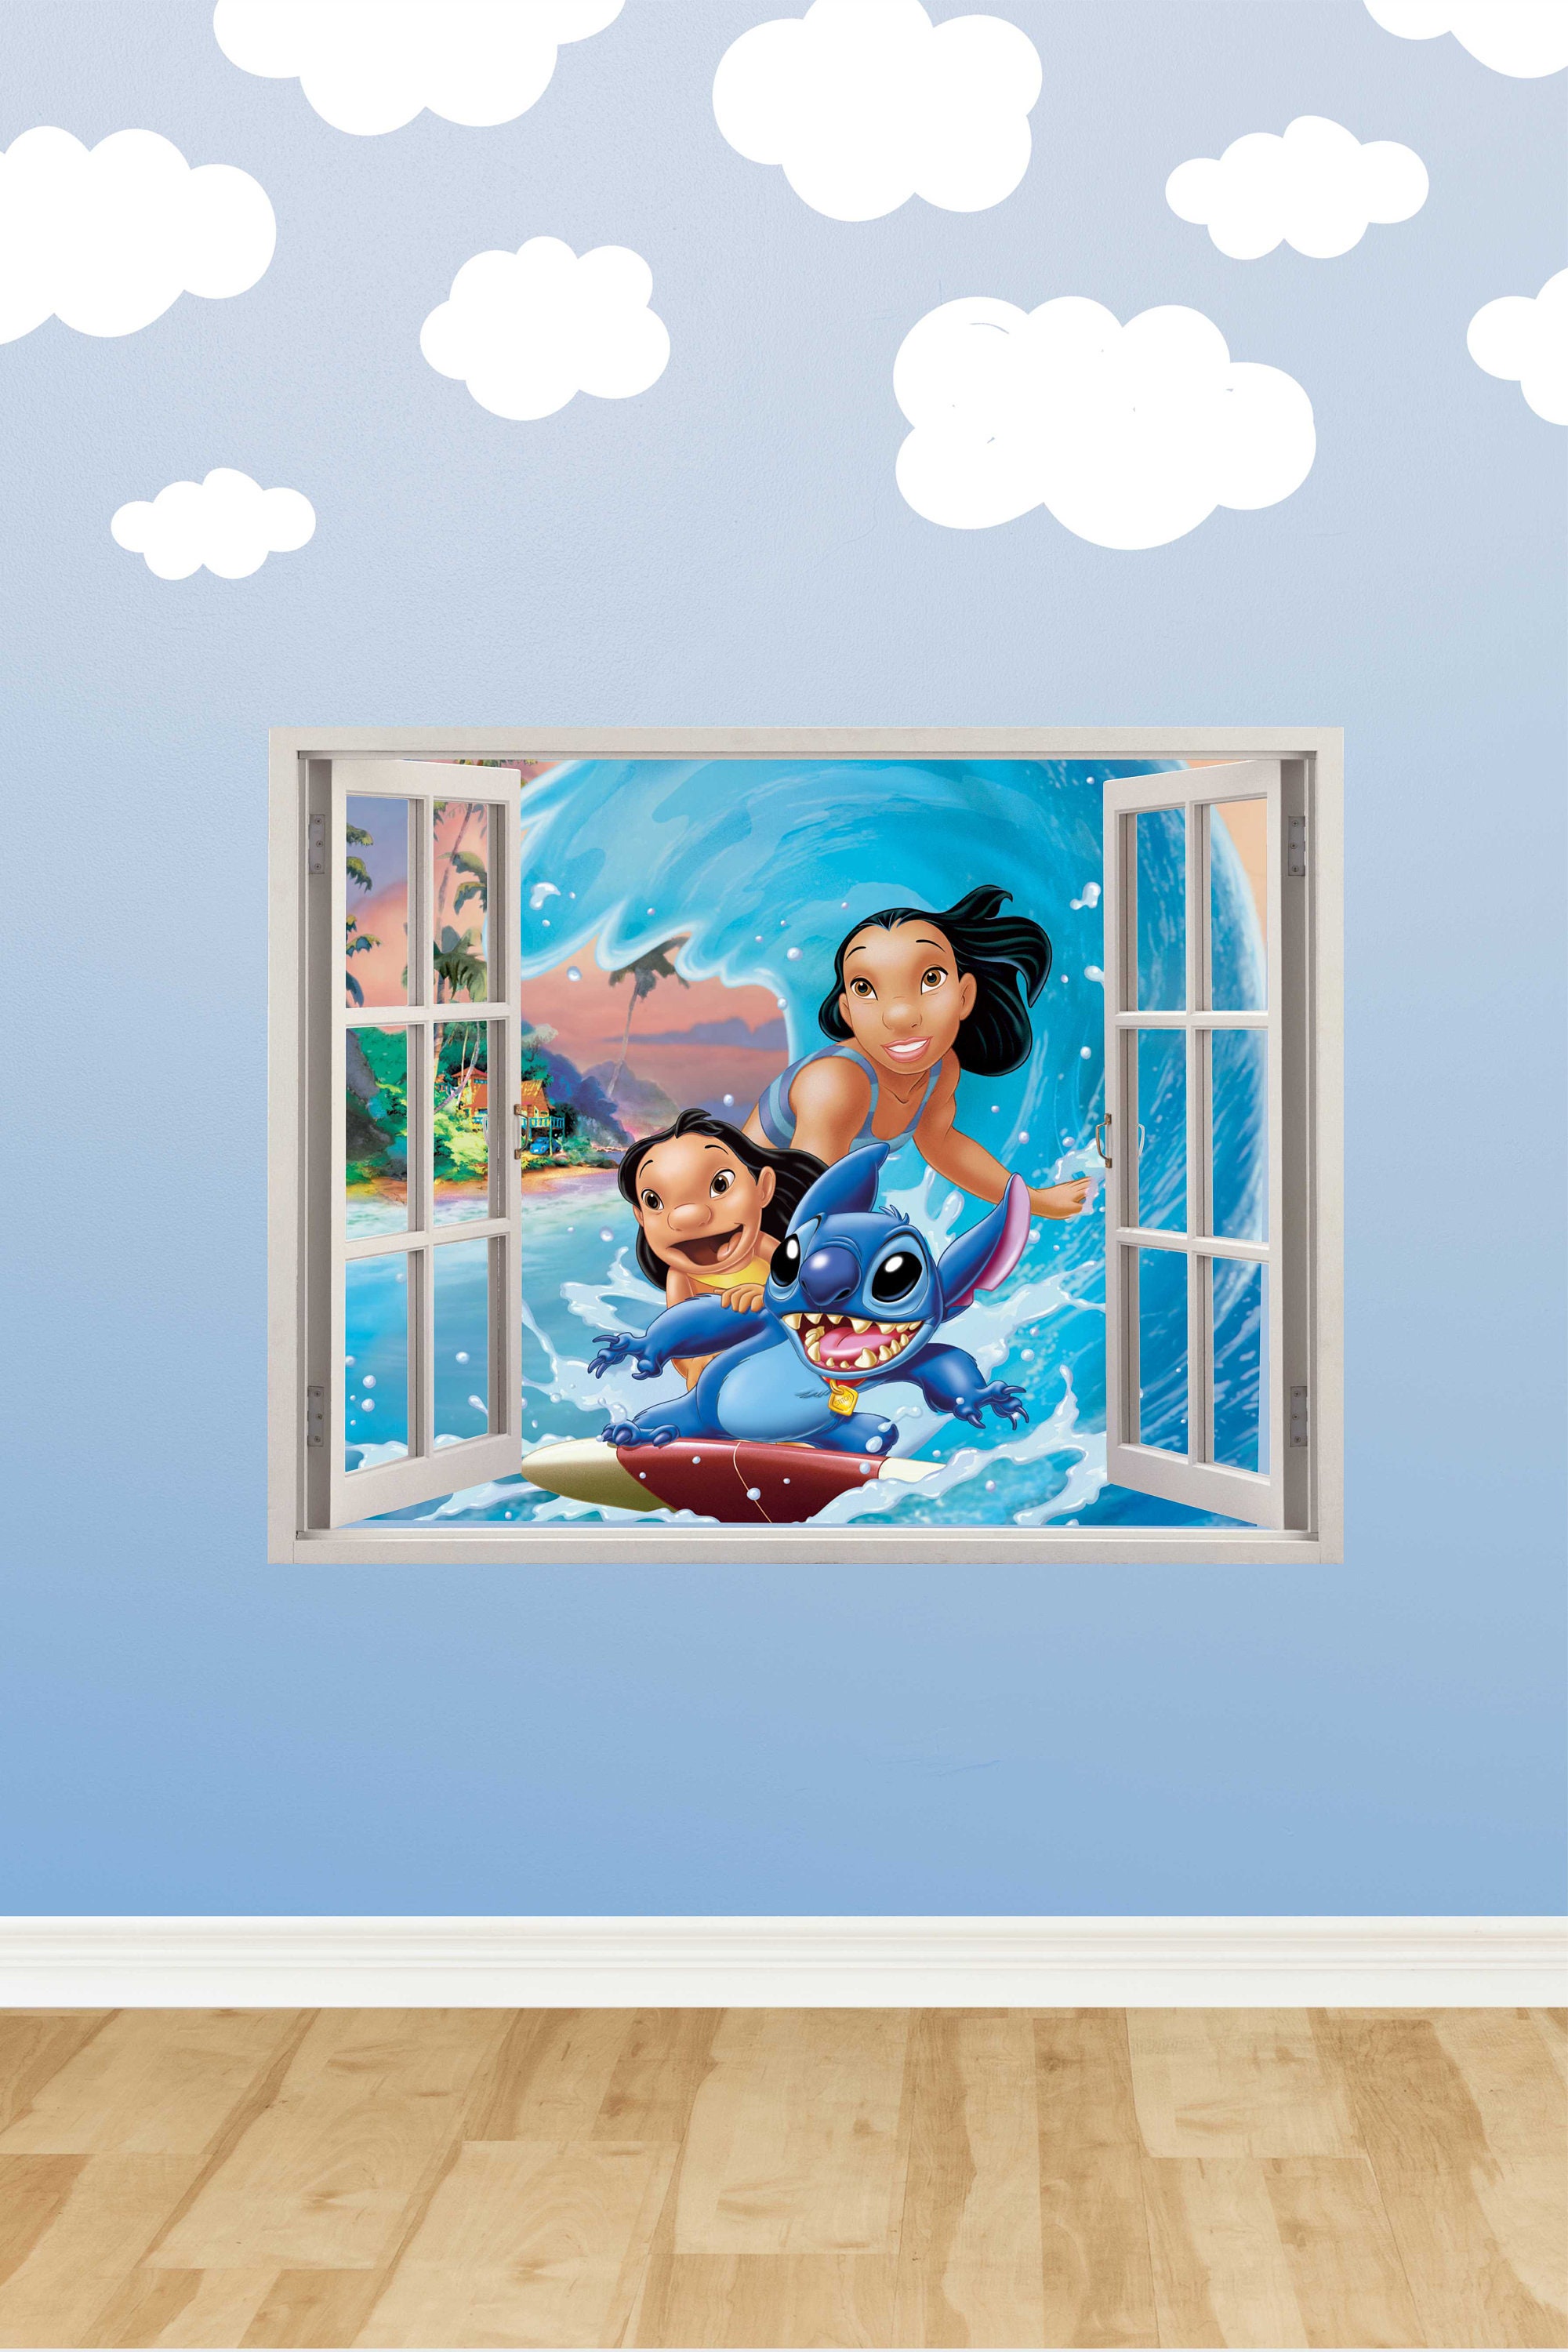 Baby Products Online - Lilo and Stitch Wall Sticker Cartoon Bedroom  Background for Kids Wall Decoration Pvc Pasted Wall Sticker - Kideno